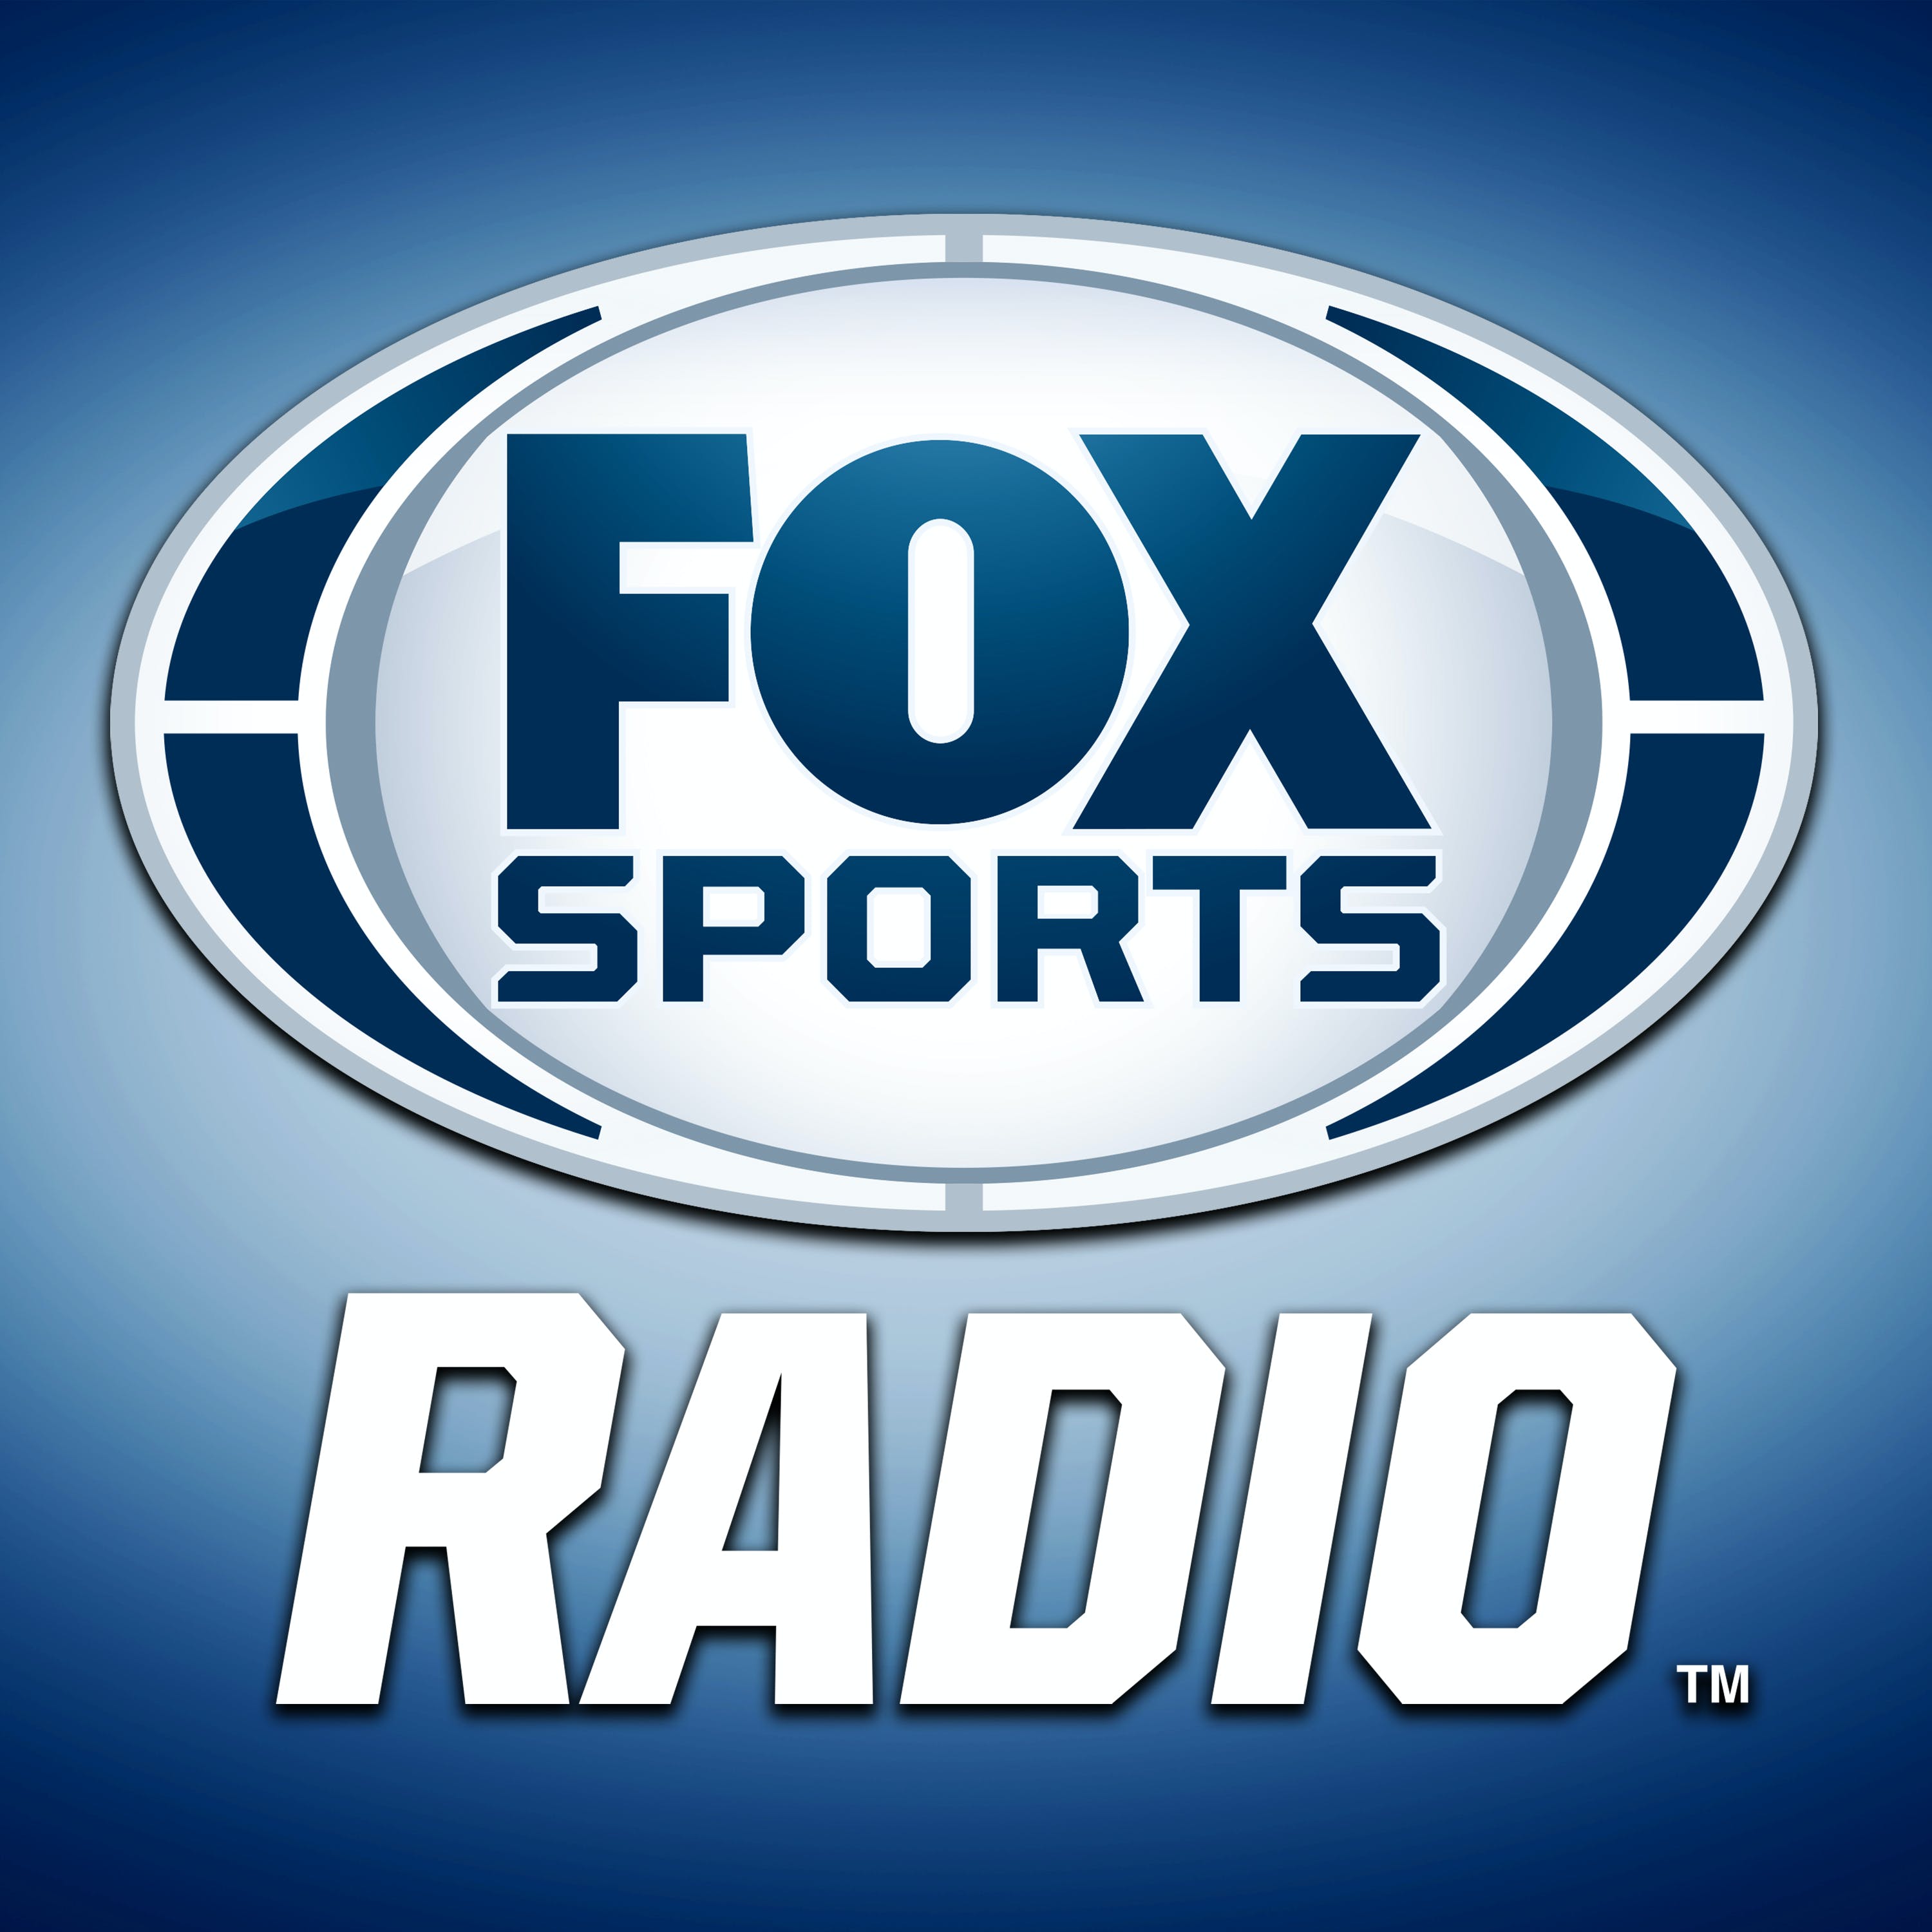 10/25/2020 - FOX Football Sunday with Andy Furman and Brian Noe - World Series Recap, College Footbal Rewind, NFL Week 7 Preview